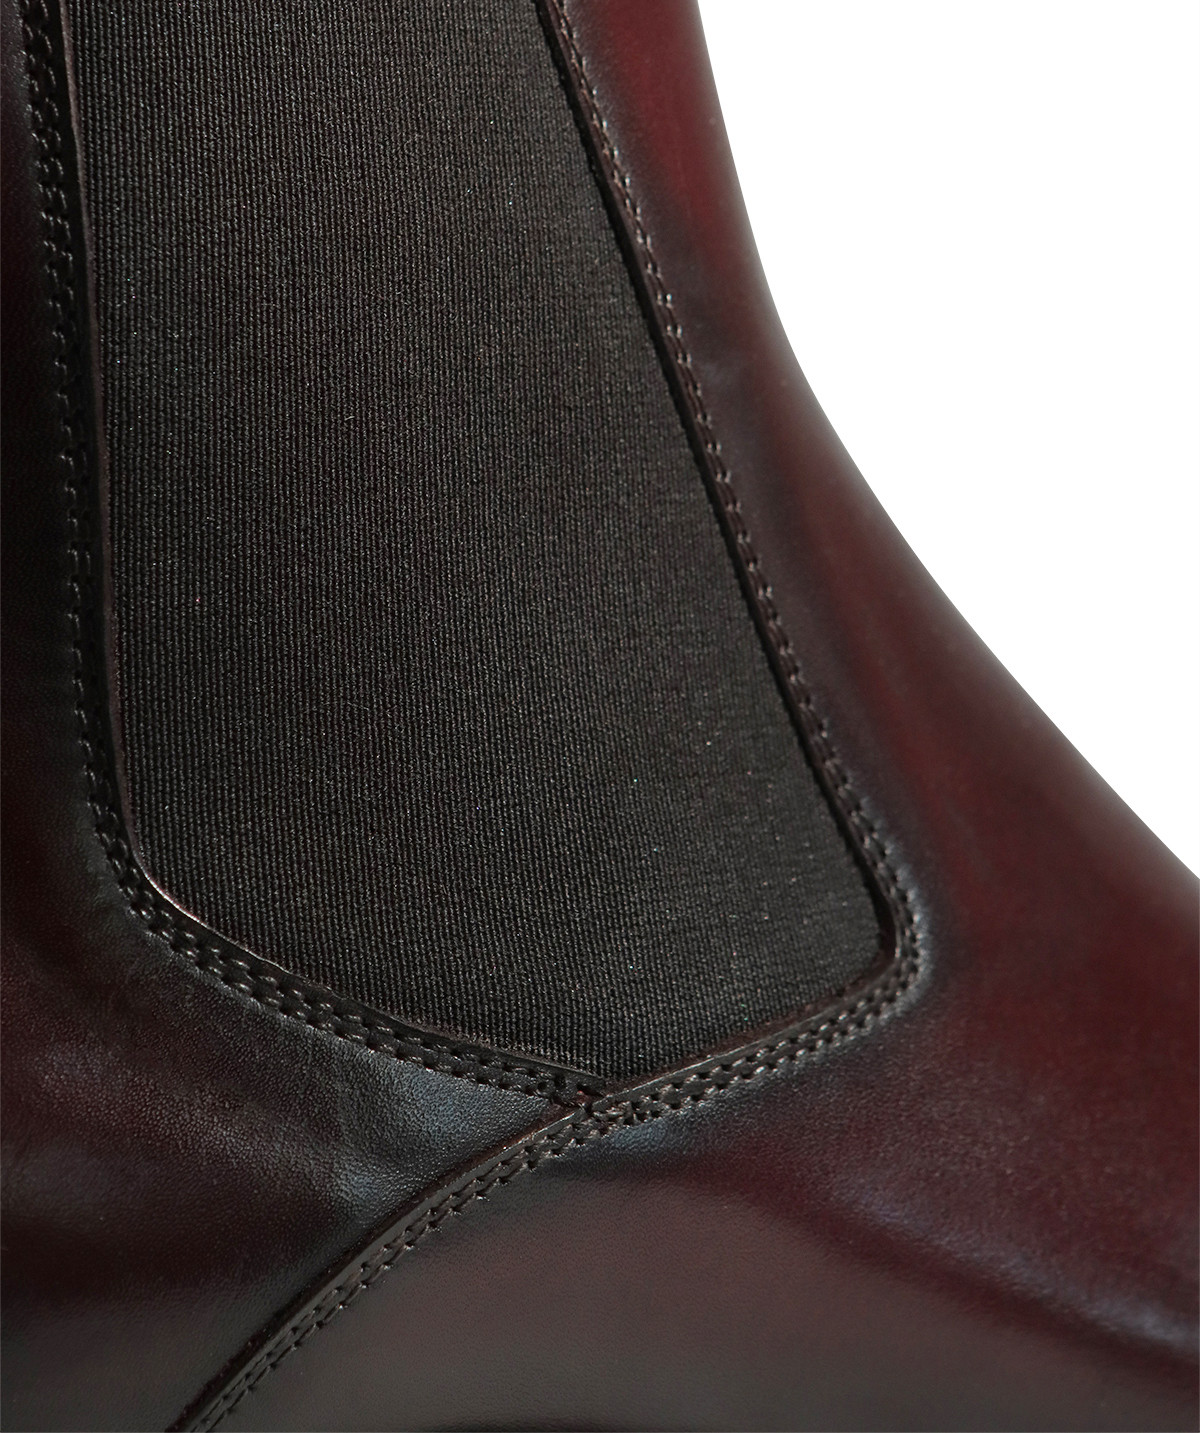 FIRENZE Burgundy Ankle Boots